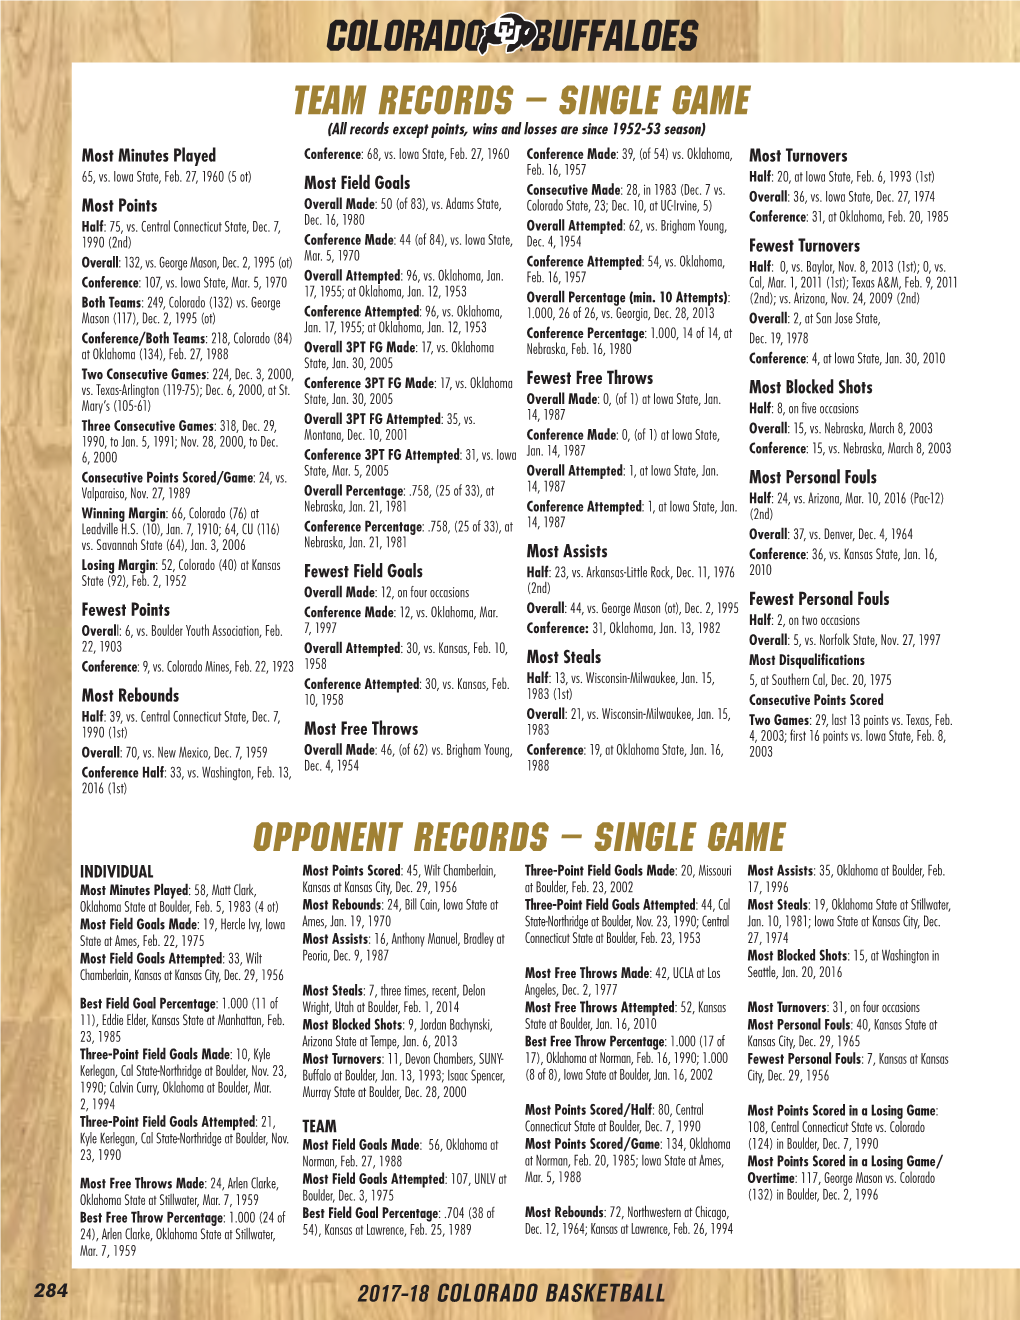 Colorado Buffaloes Team Records – Single Game (All Records Except Points, Wins and Losses Are Since 1952-53 Season) Most Minutes Played Conference: 68, Vs